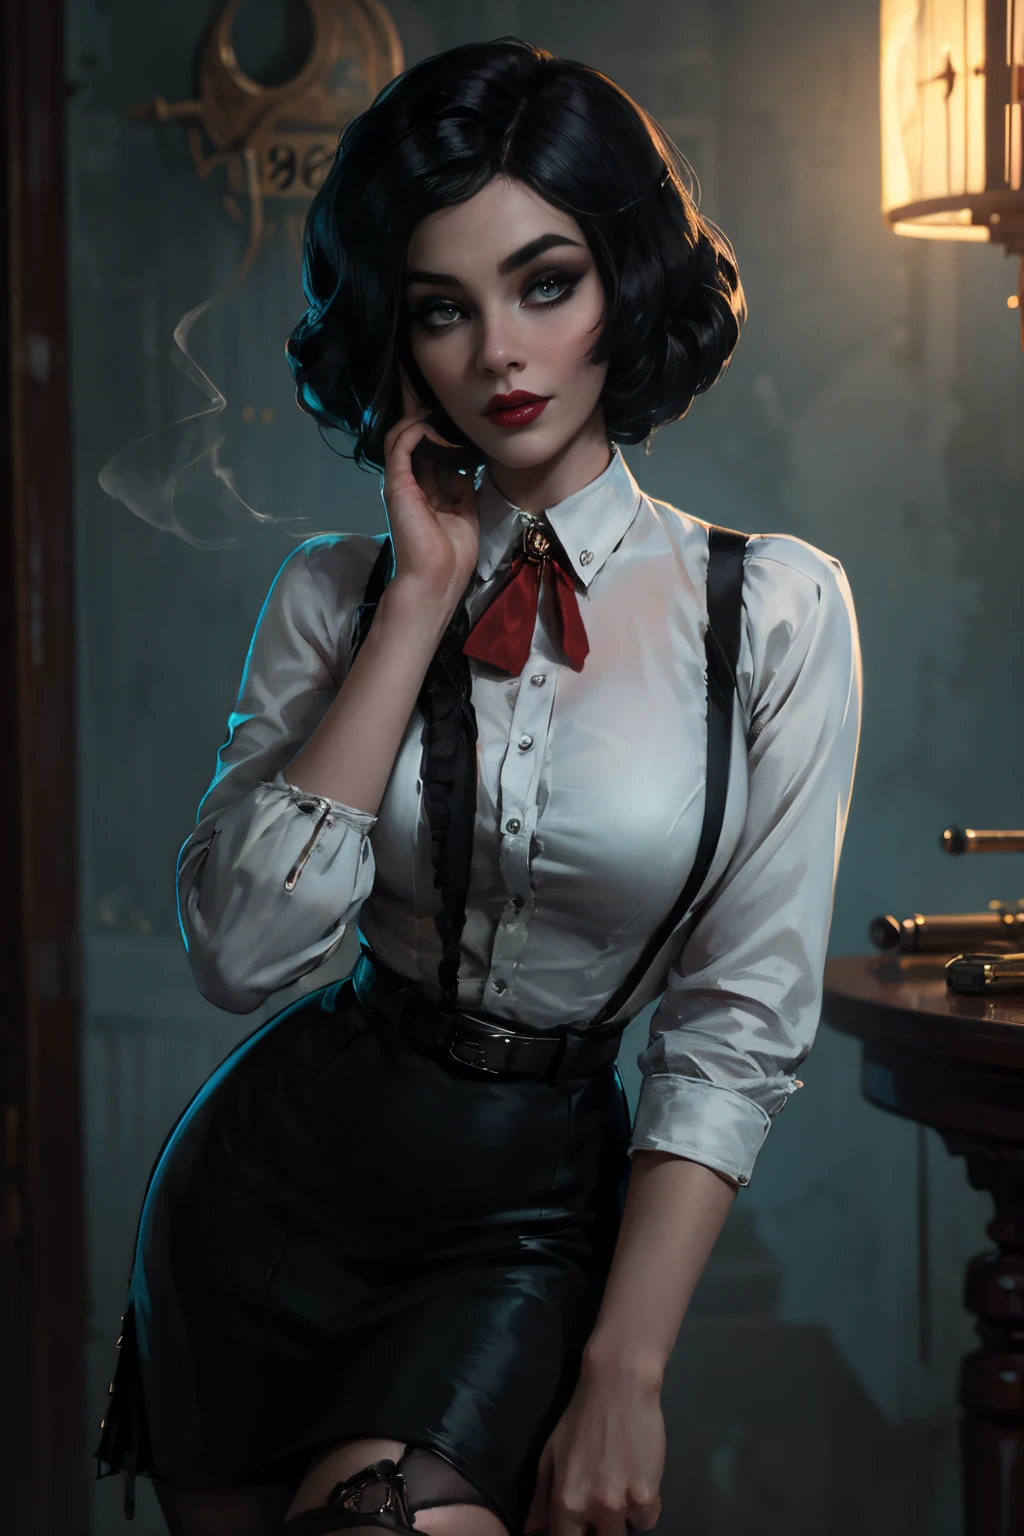 ( there is a woman holding a cigarette in her hand ),( Elizabeth from Burial at Sea ) (realistic:1.5), (fully dressed), ((female in 1950 hair short hair style a white long-sleeved blouse, her bird cameo, a black knee-length tight fitted skirt with a red belt, fishnet stockings and black heels with an ankle strap. Her hairstyle is brushed out pin curls and she wears make-up. )), (long black skirt:1.2) (white shirt:1.2) (masterpiece), (specular lighting:1.3), (hyperrealistic:1.2), (photorealistic face:1.2), (perfect face), (perfect eyeest quality), (there is a woman holding a cigarette in her hand, elizabeth from bioshock Burial at Sea, dramatic smoking pose, epic and classy portrait, beautiful , with smoke, cigarette, bioshock steampunk portrait ), (4k), sharp focus, octane render, best quality, extremely detailed, intricate, fantasy, soft lighting, (curvy:1.3), ( big eyes :1.3), (futanari:1.2), thick eyelashes, long eyelashes, ( slim ), smile, ((1950:1.5)), ( red lips, long eyelashes, mascara, eyeliner, eyeshadow, makeupt:1.3), cosy, looking at viewer, detailed skin , zfuta futanari, (erection:1.4)